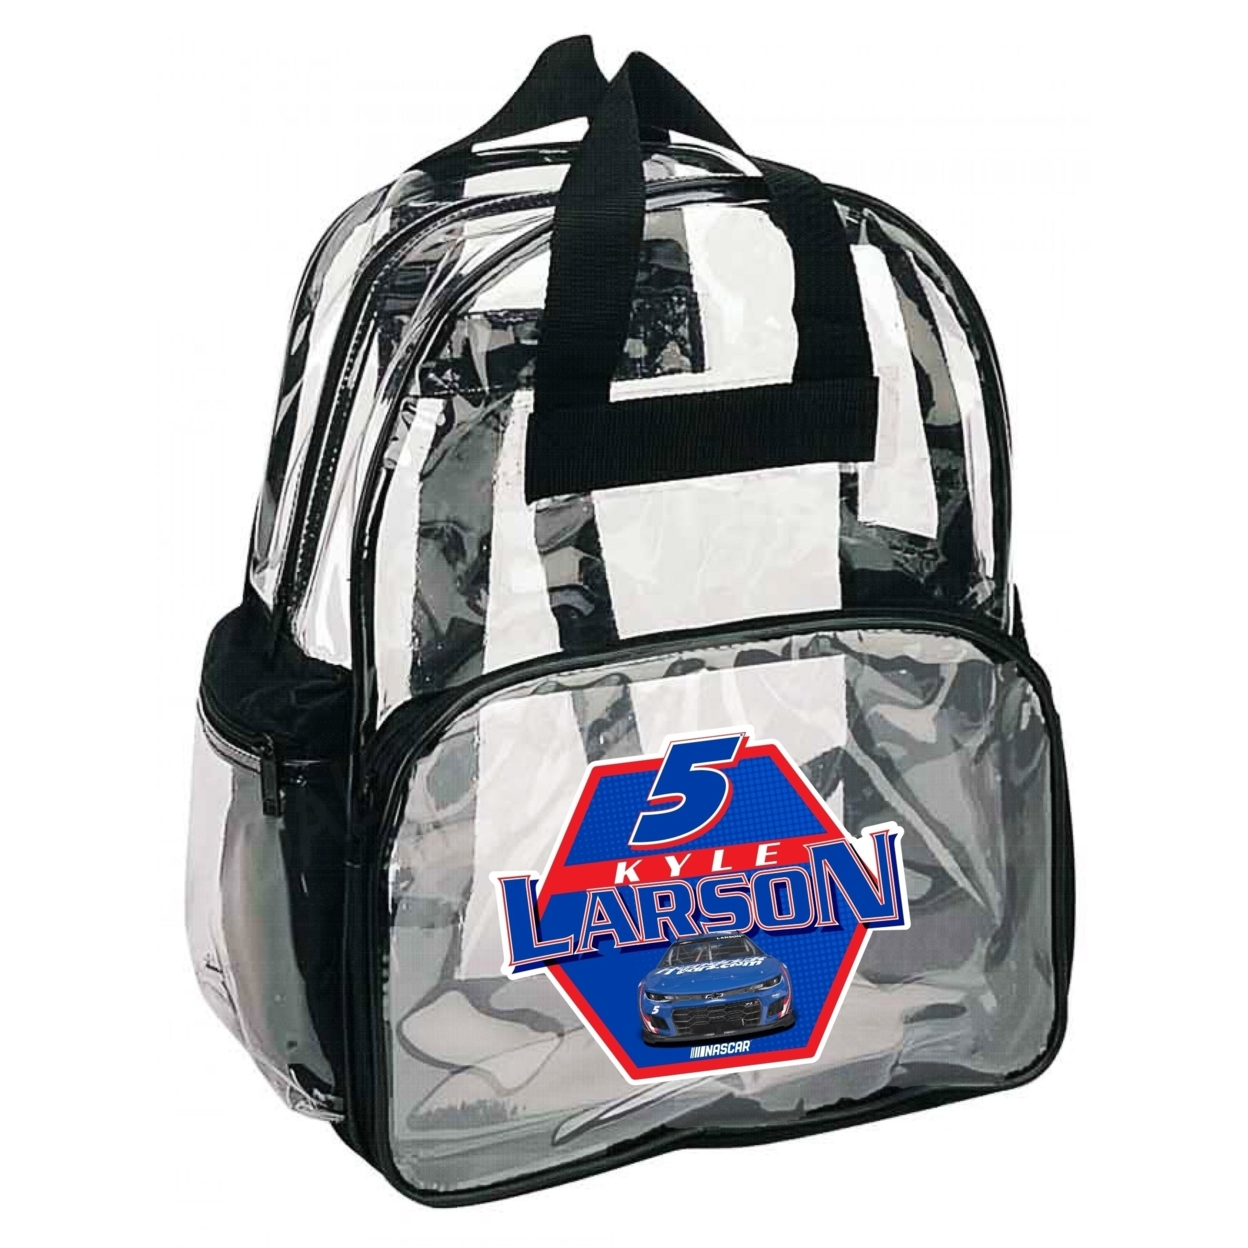 #5 Kyle Larson Officially Licensed Clear Backpack